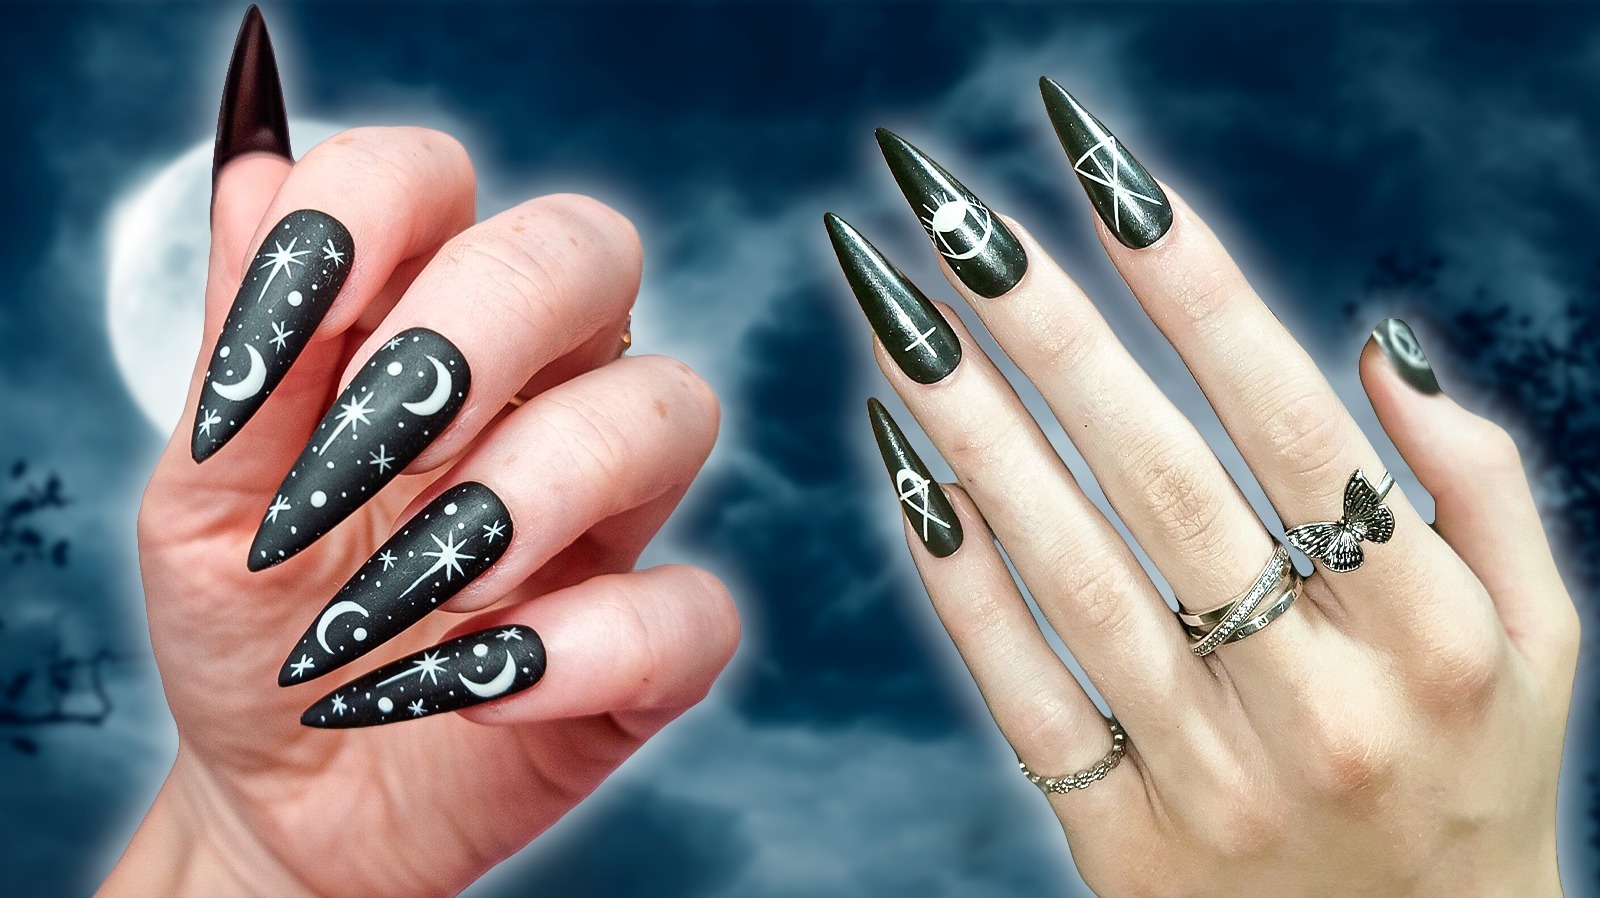 Buy JELLY BLACK Korean Style Press on Nail Art, Gothic Simple Clean Nails  for Fall Winter, Halloween Nails, Goth, Stiletto Long Medium Short Online  in India - Etsy